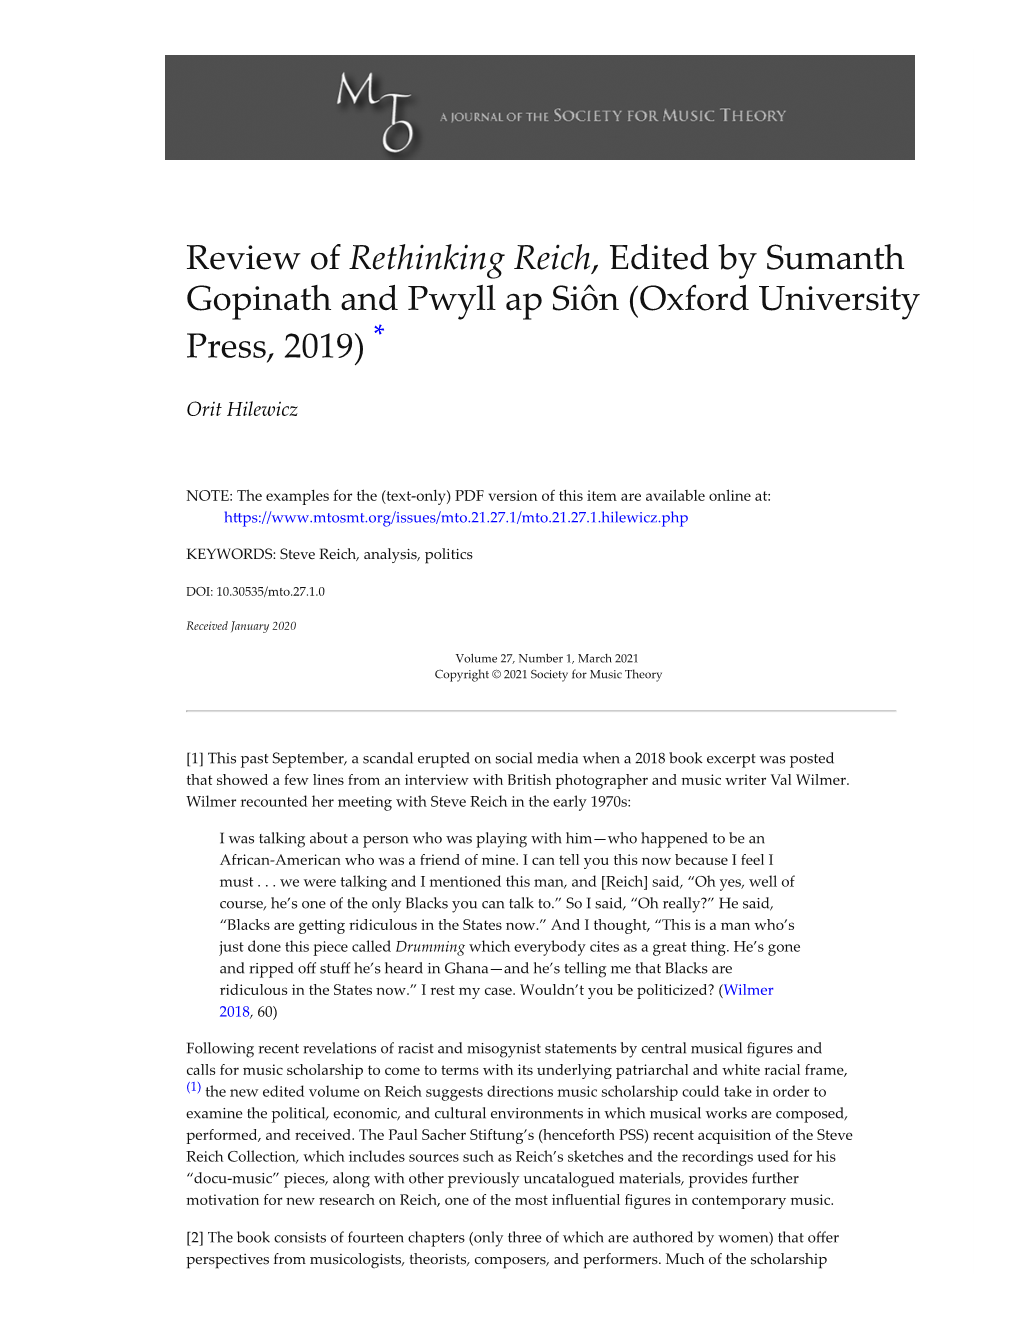 Review of Rethinking Reich, Edited by Sumanth Gopinath and Pwyll Ap Siôn (Oxford University Press, 2019) *